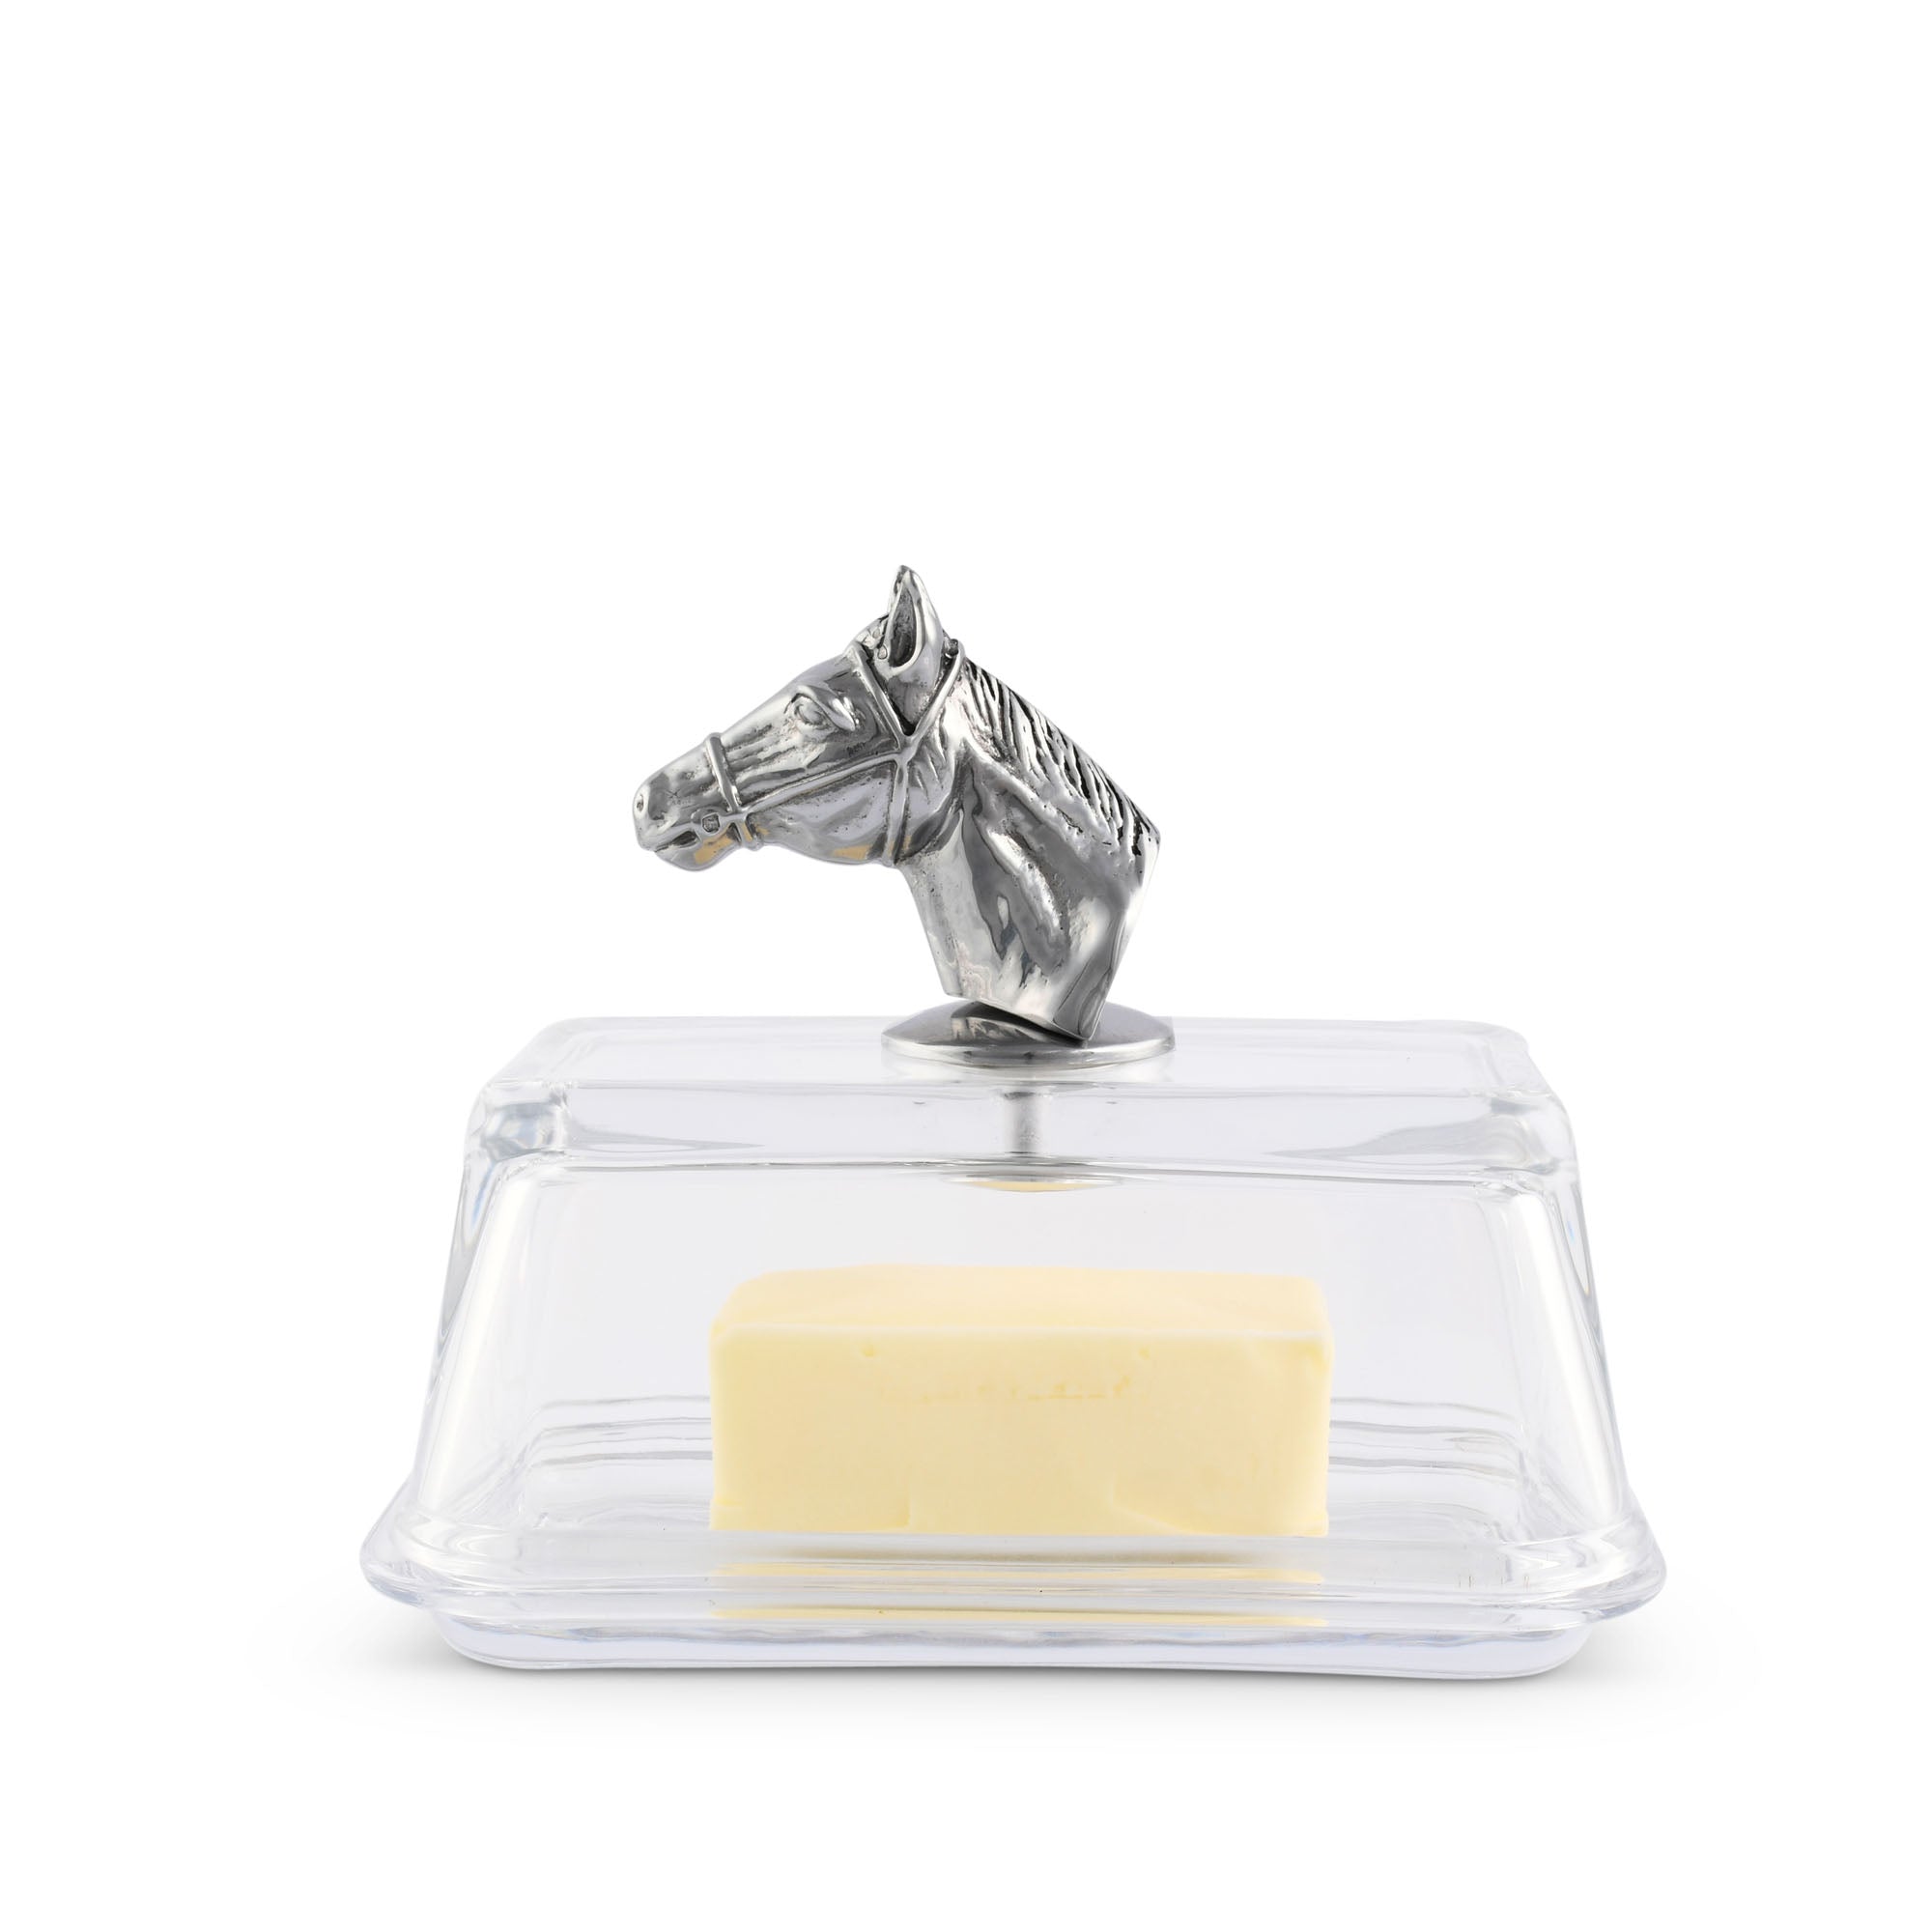 Arthur Court Butter Dish - Equestrian Product Image